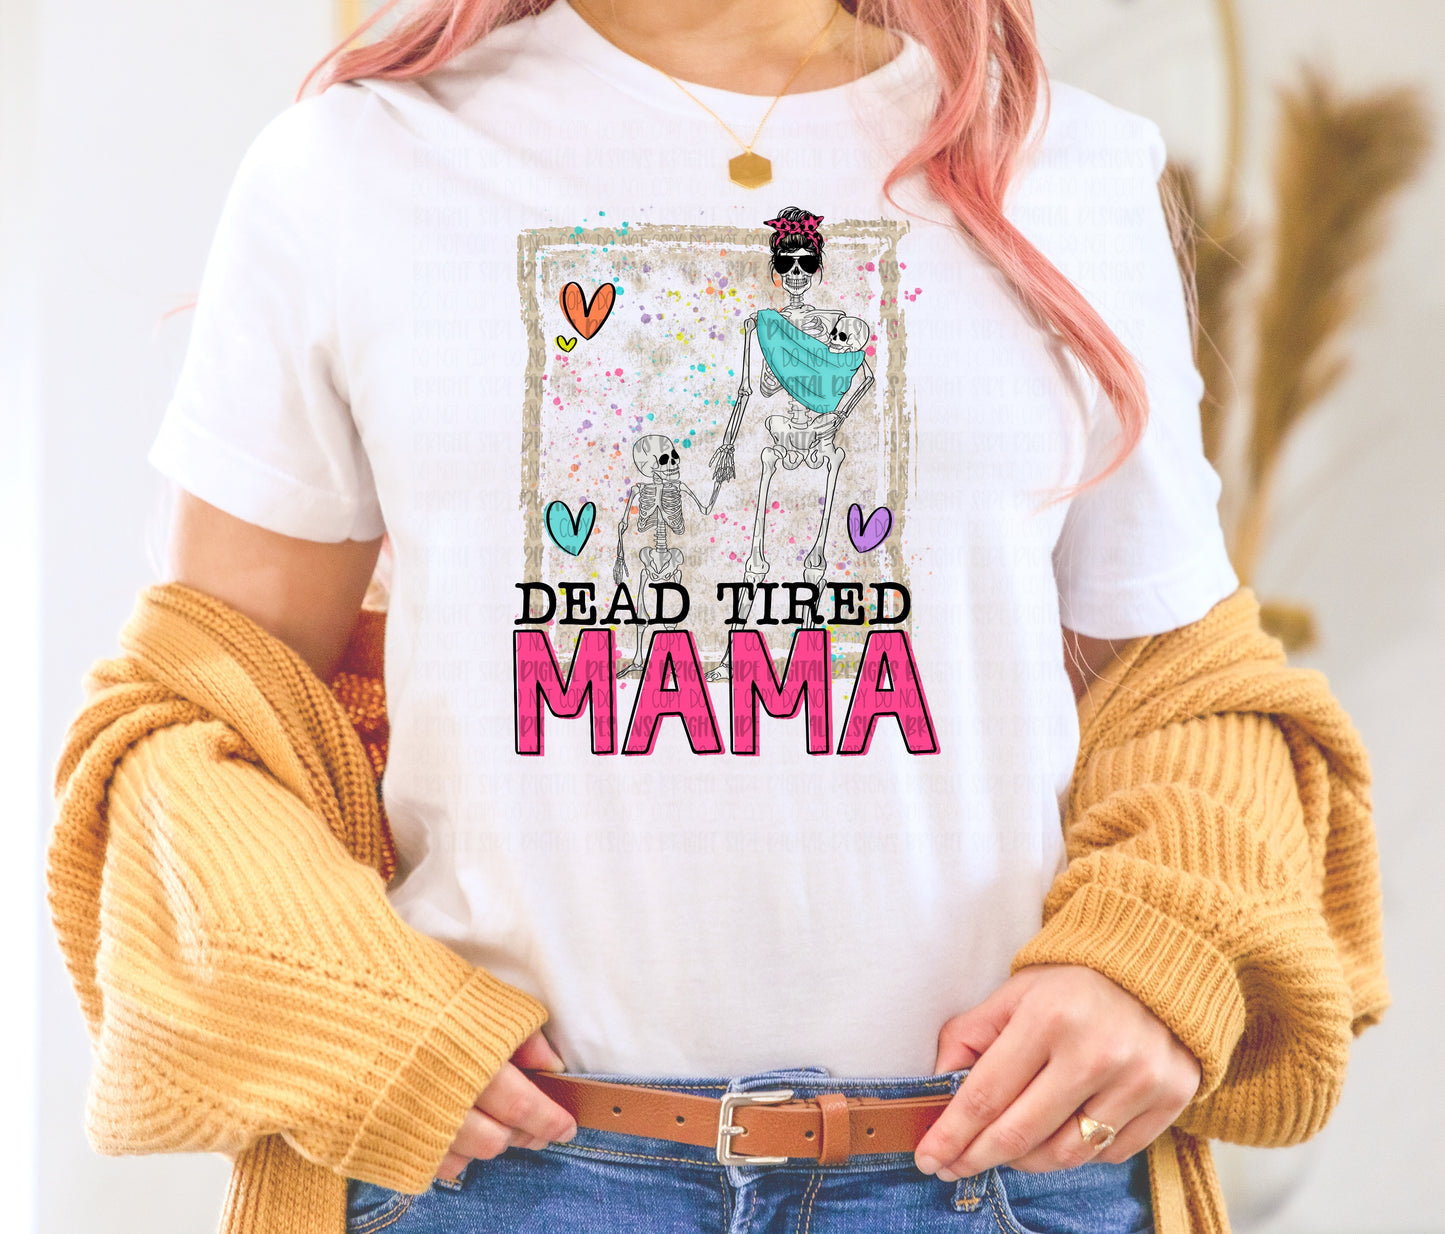 Dead tired mama -gender neutral baby